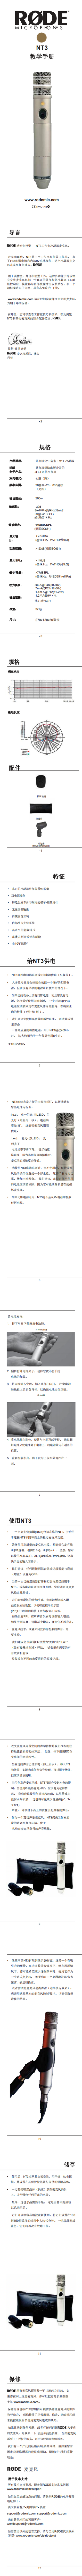 NT3_product_manual_1_12_translate_Chinese_0.png